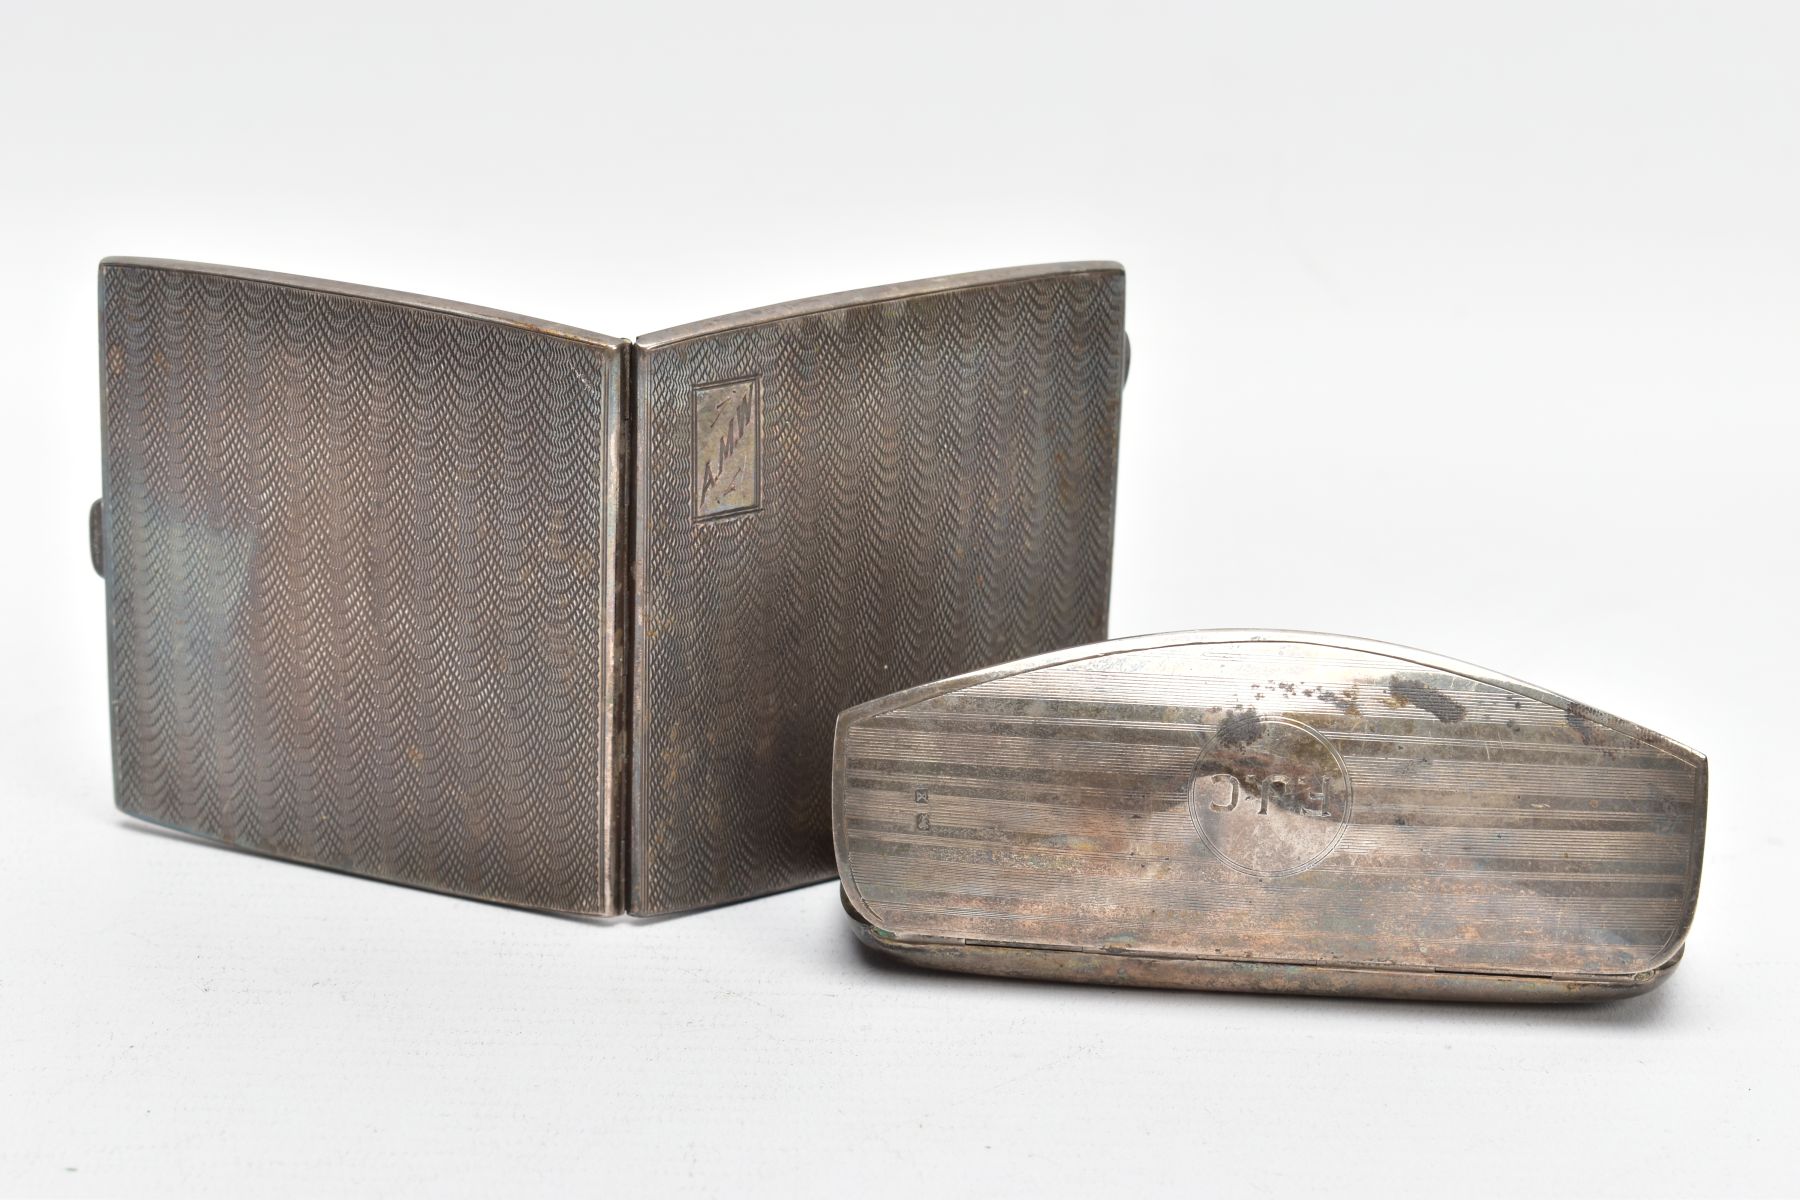 A SILVER CIGARETTE CASE AND GLASSES CASE, the cigarette case of an engine turned design, engraved